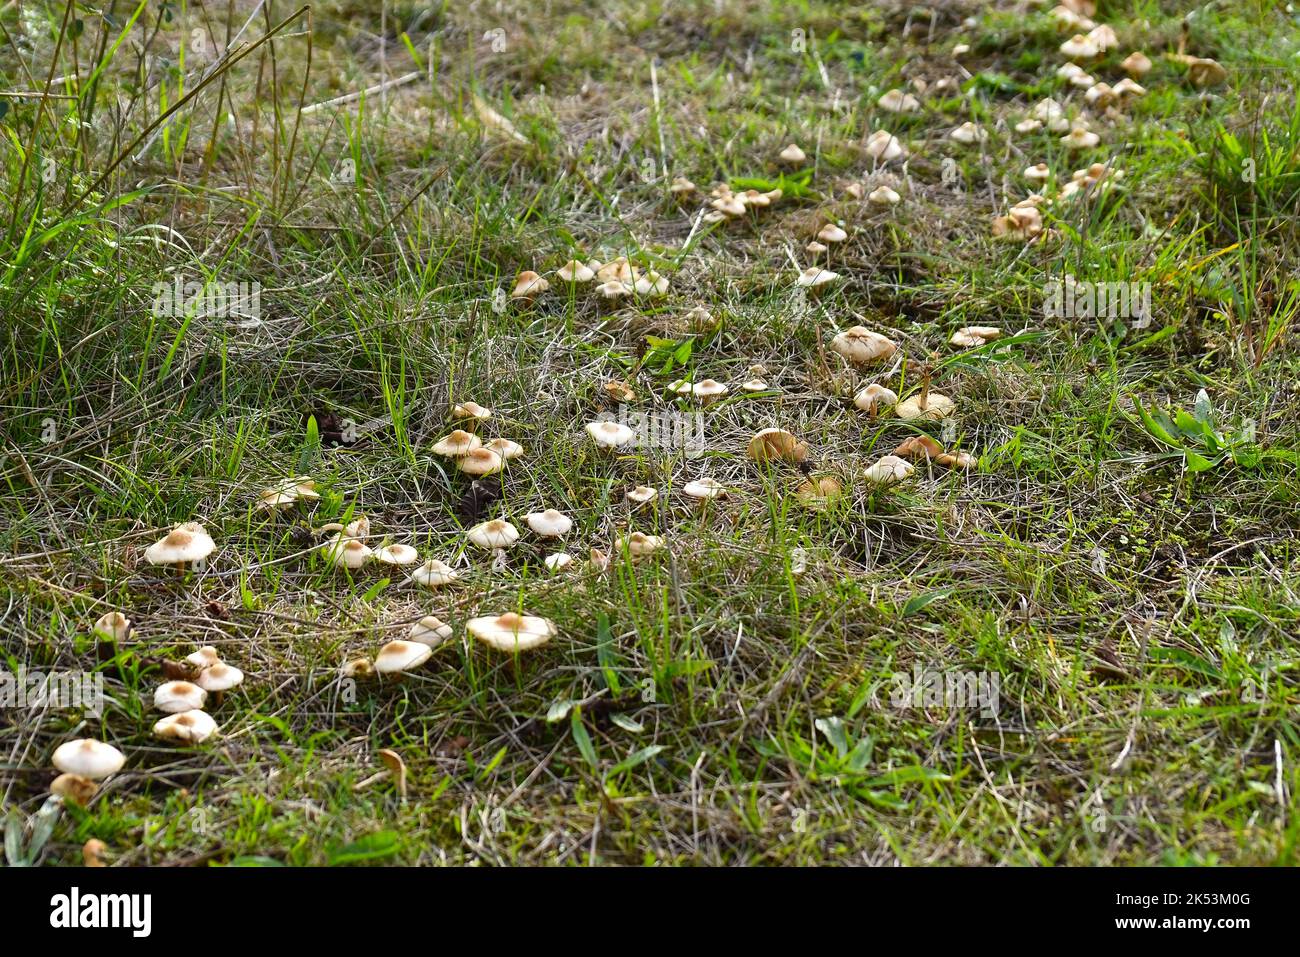 Mushrooms growing in a circle. Devil's circle in Germany, Europe Stock Photo